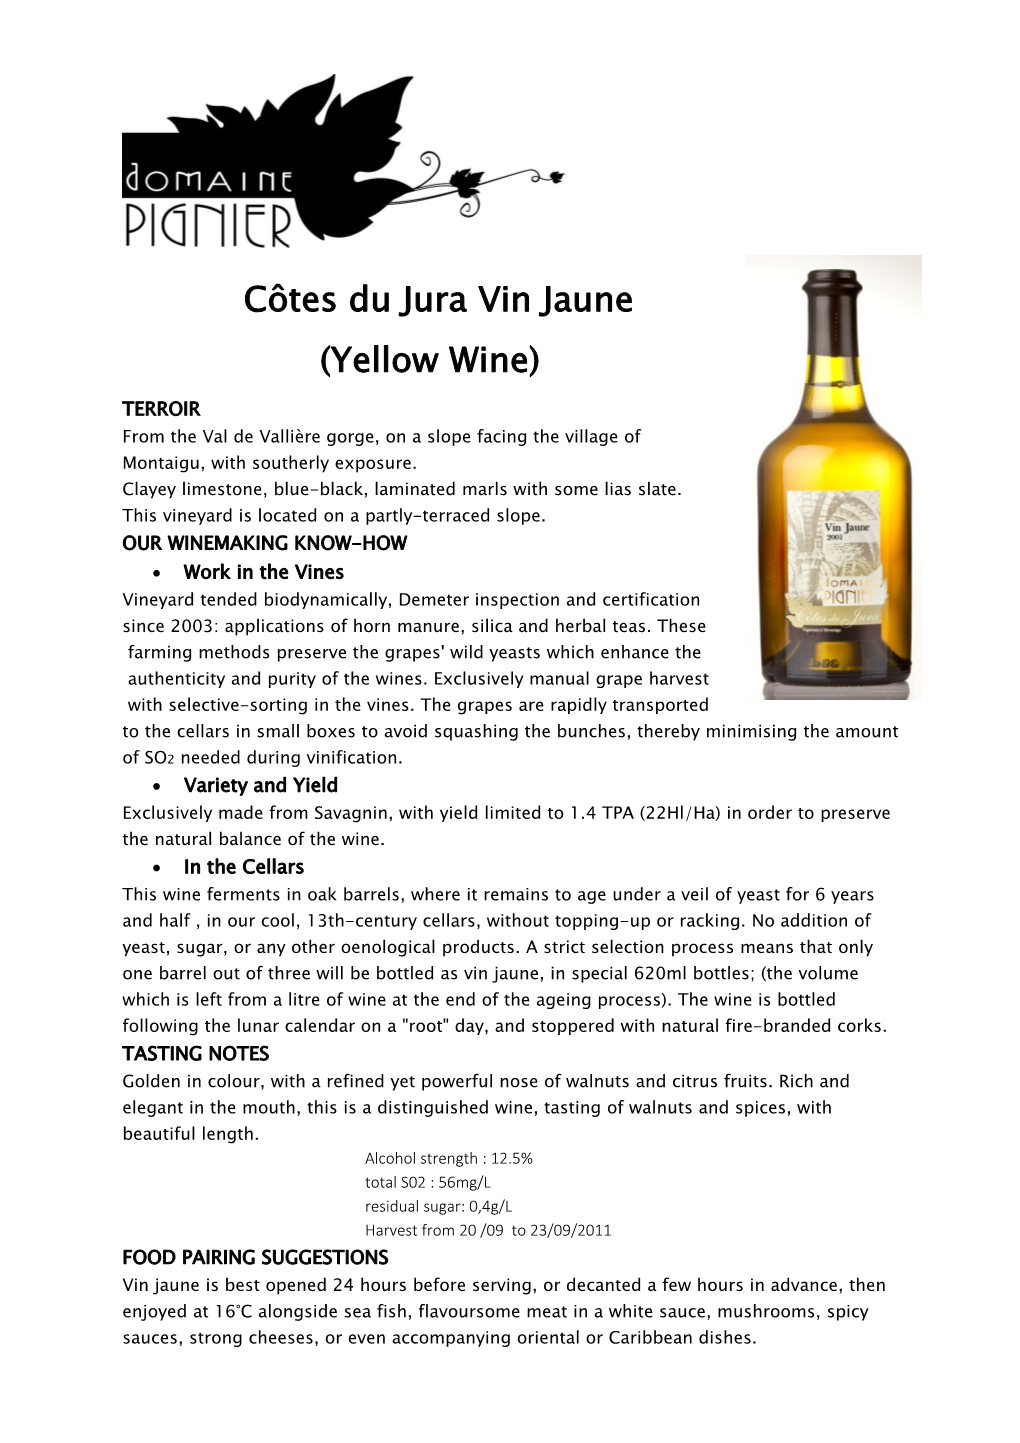 Côtes Du Jura Vin Jaune (Yellow Wine) TERROIR from the Val De Vallière Gorge, on a Slope Facing the Village of Montaigu, with Southerly Exposure